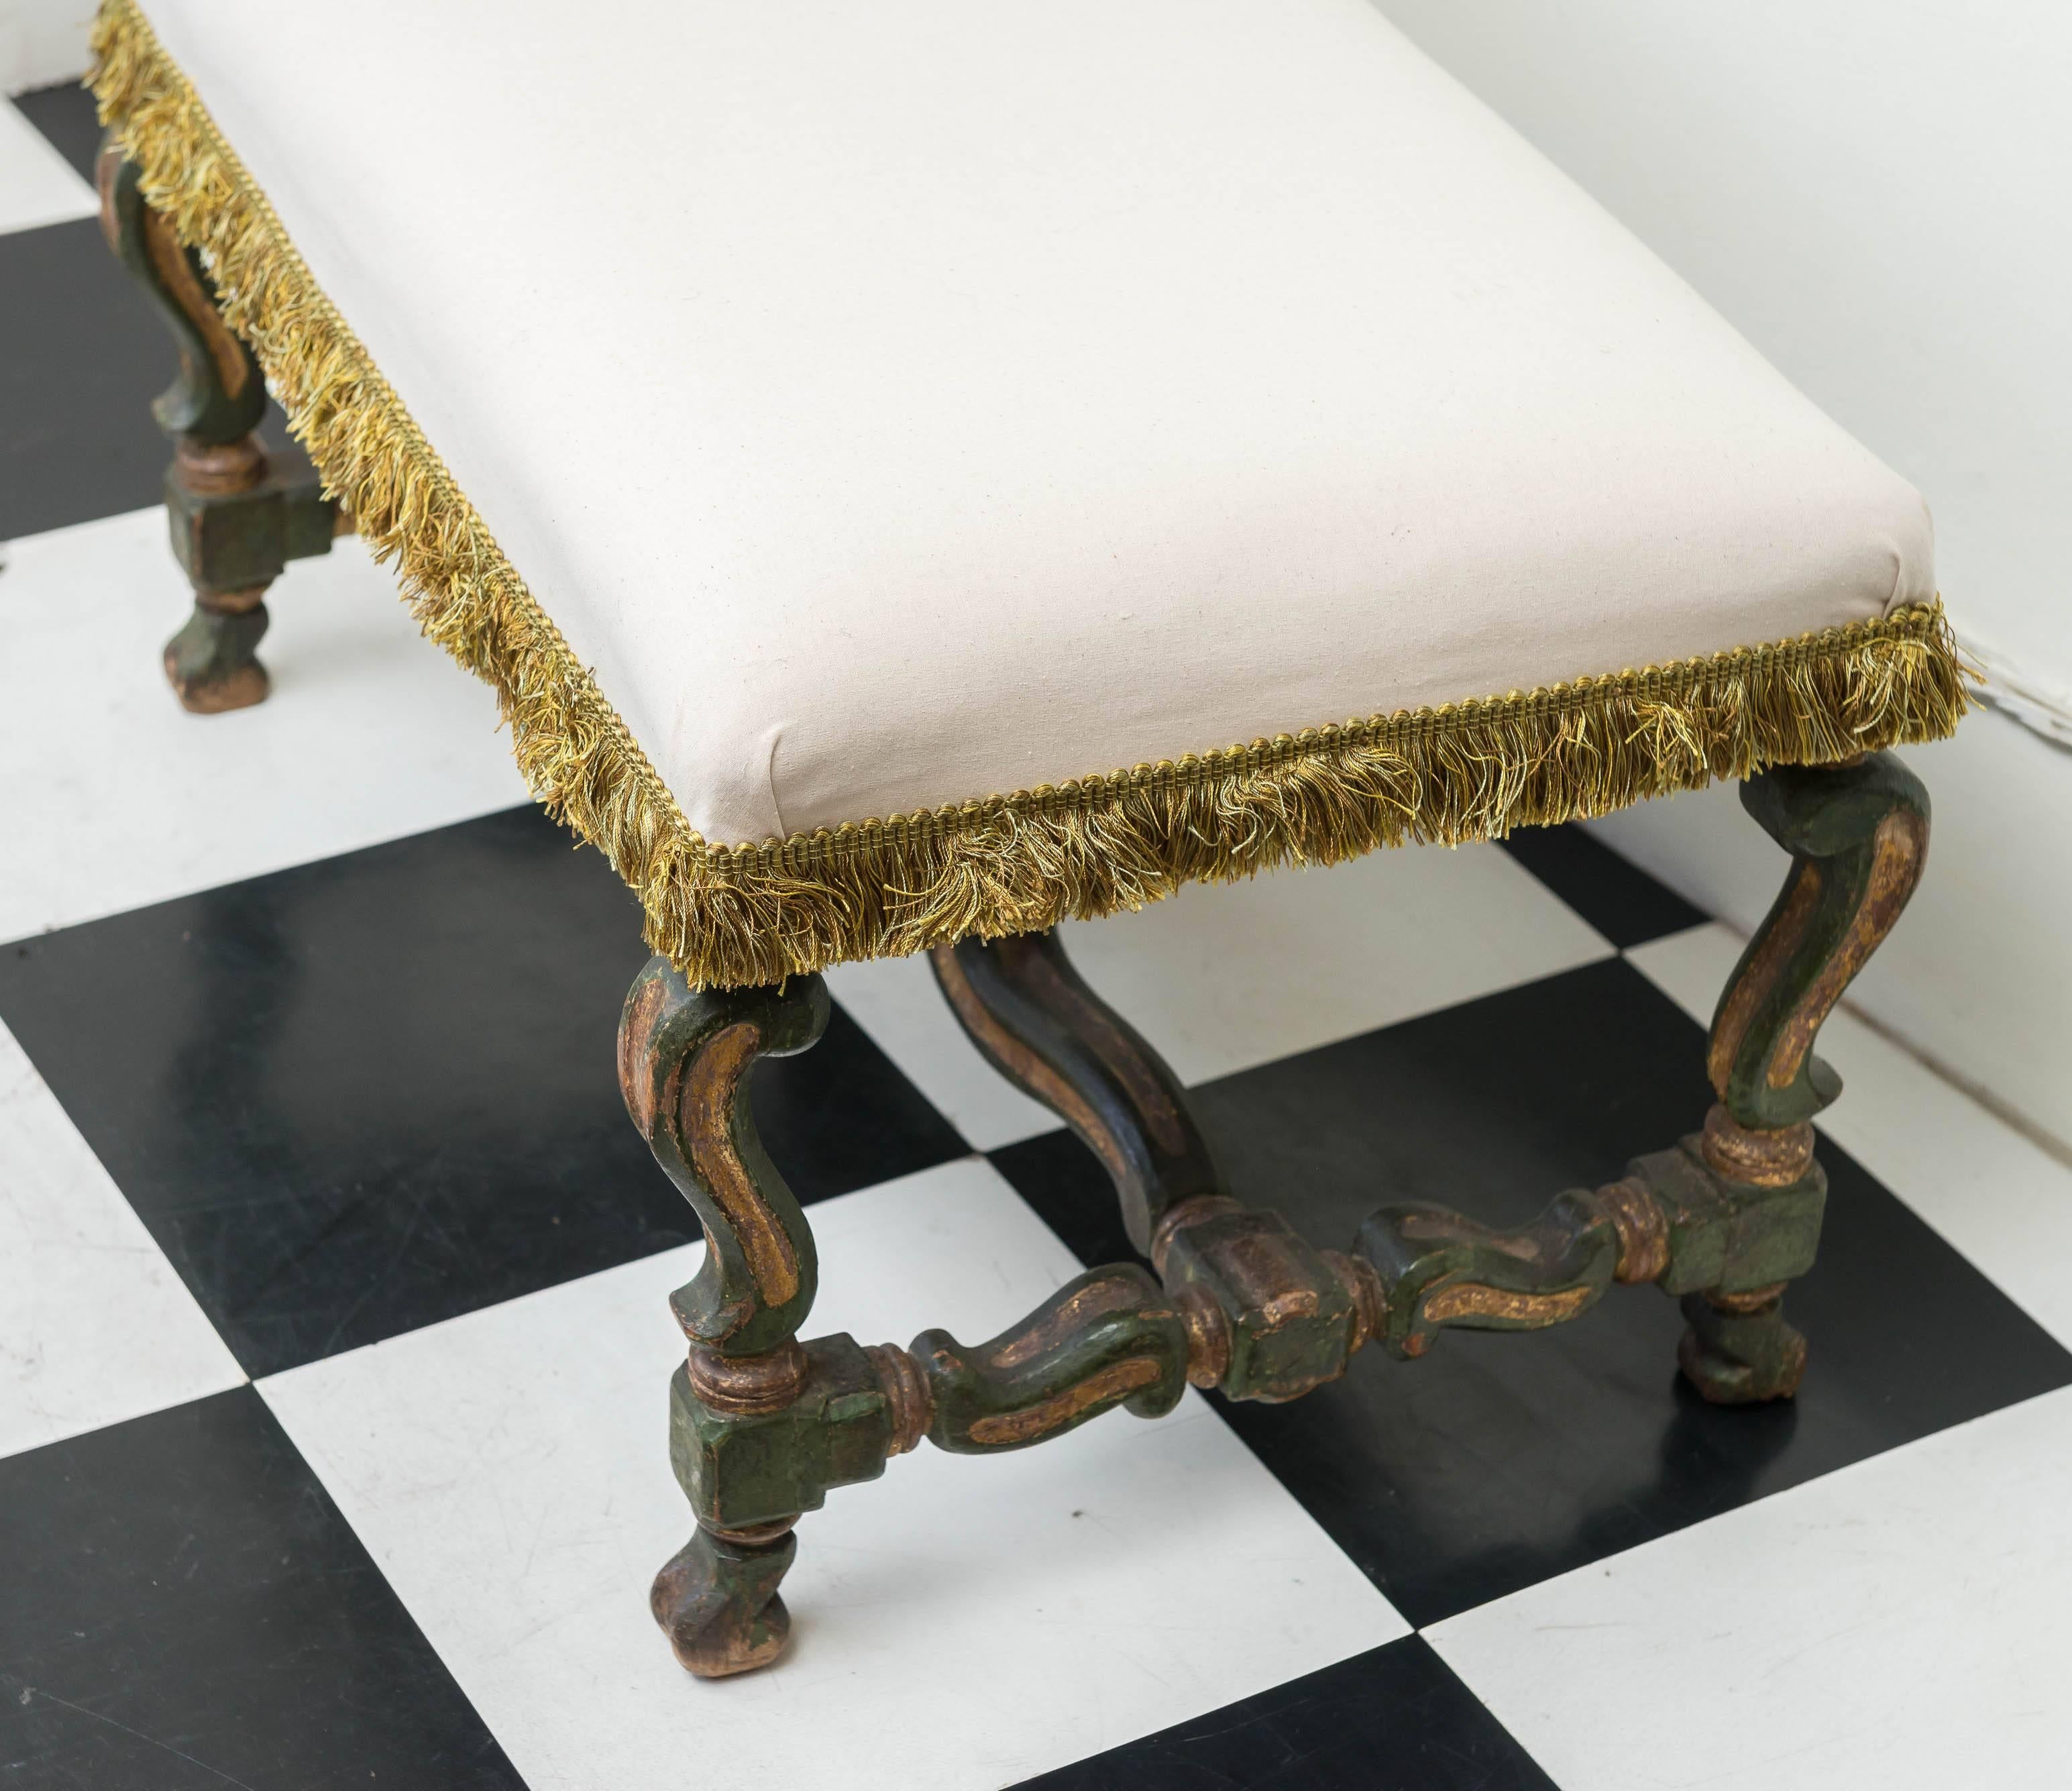 17th century Italian parcel-gilt and green painted bench. Retains the original surface with wear and subtle craclure. Covered in a simple cream muslin with an old green fringe. Scroll form legs and stretchers.